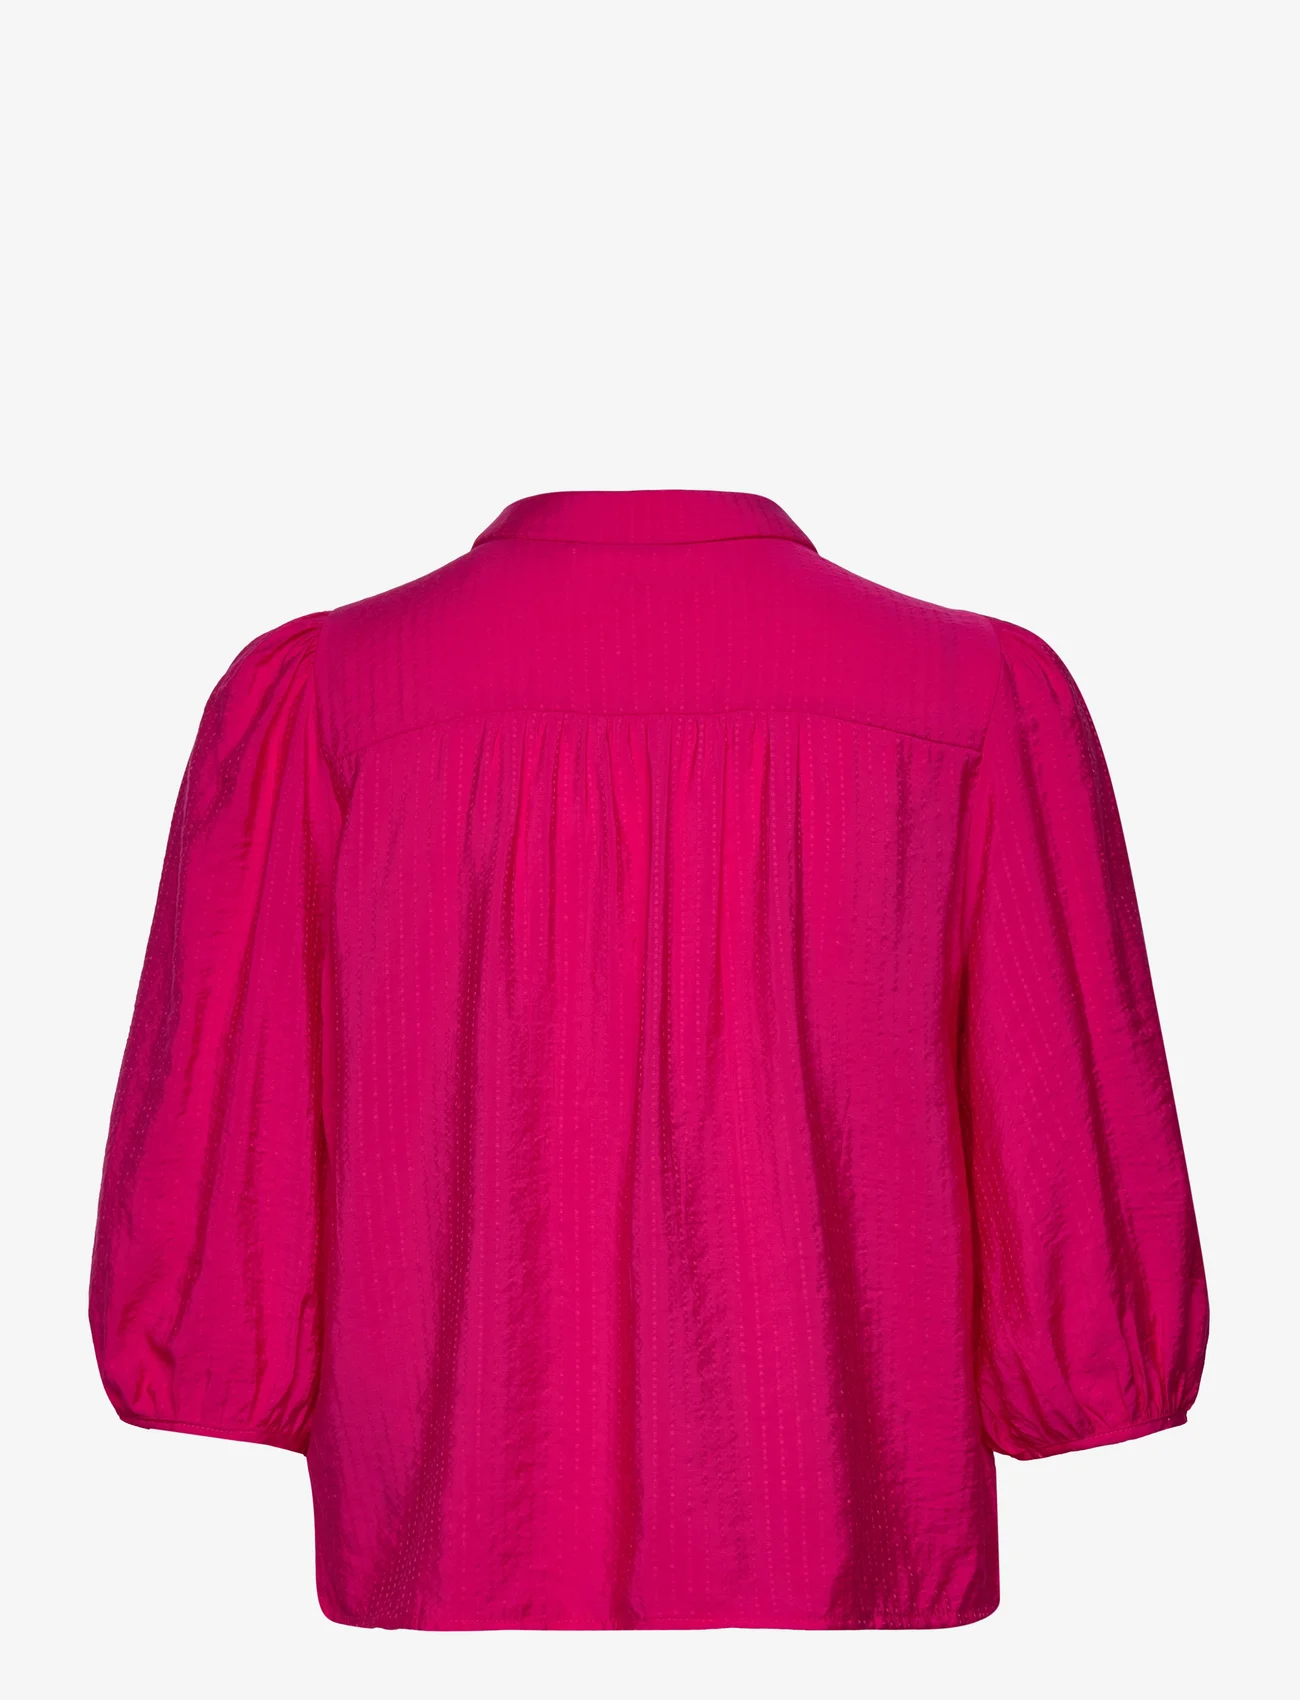 Lollys Laundry - Tunis Shirt - 51 pink - 1